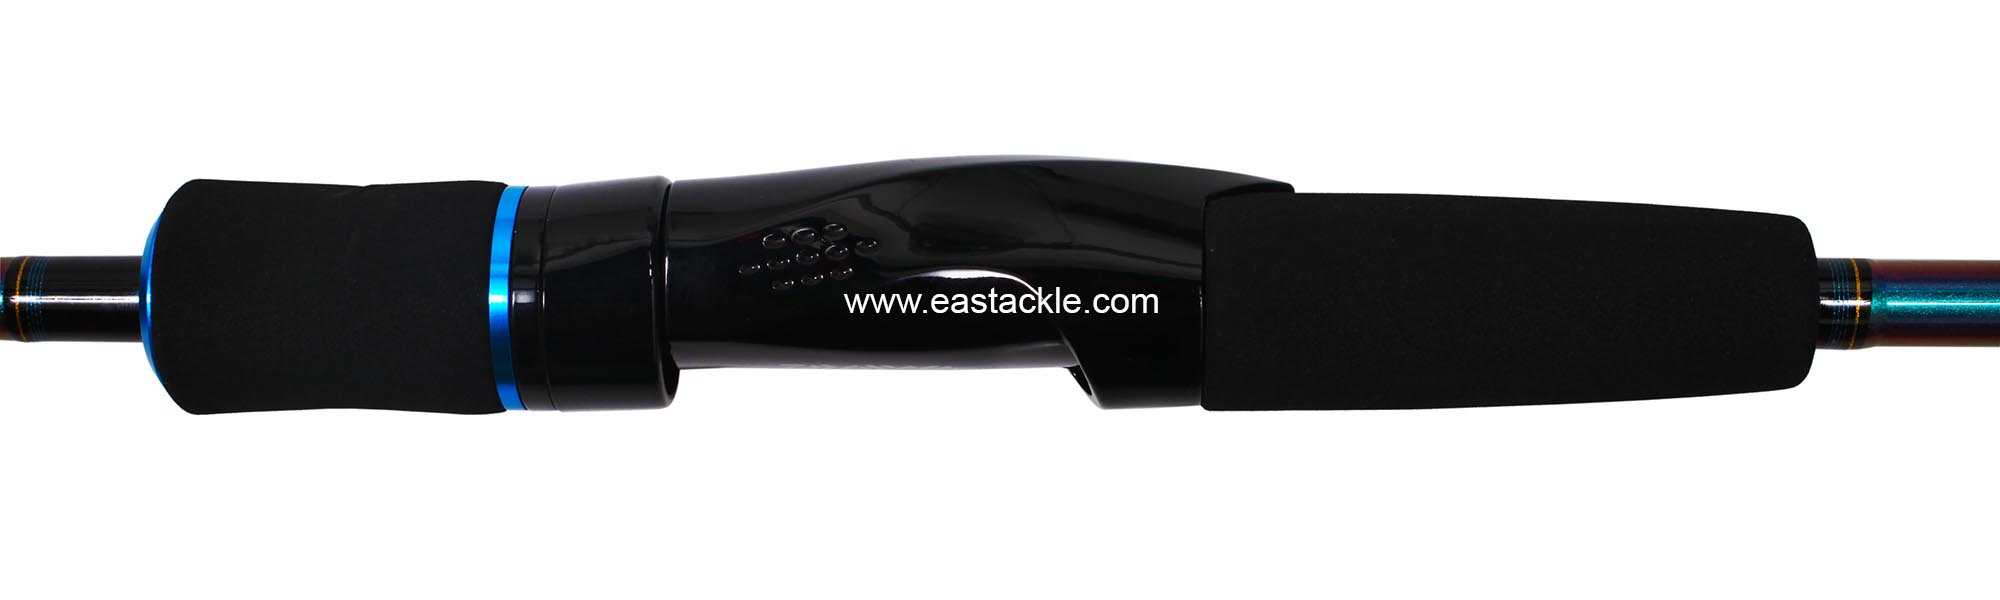 Daiwa - Harrier 602MHS-SD - Spinning Rod - Reel Seat Section (Side View) | Eastackle